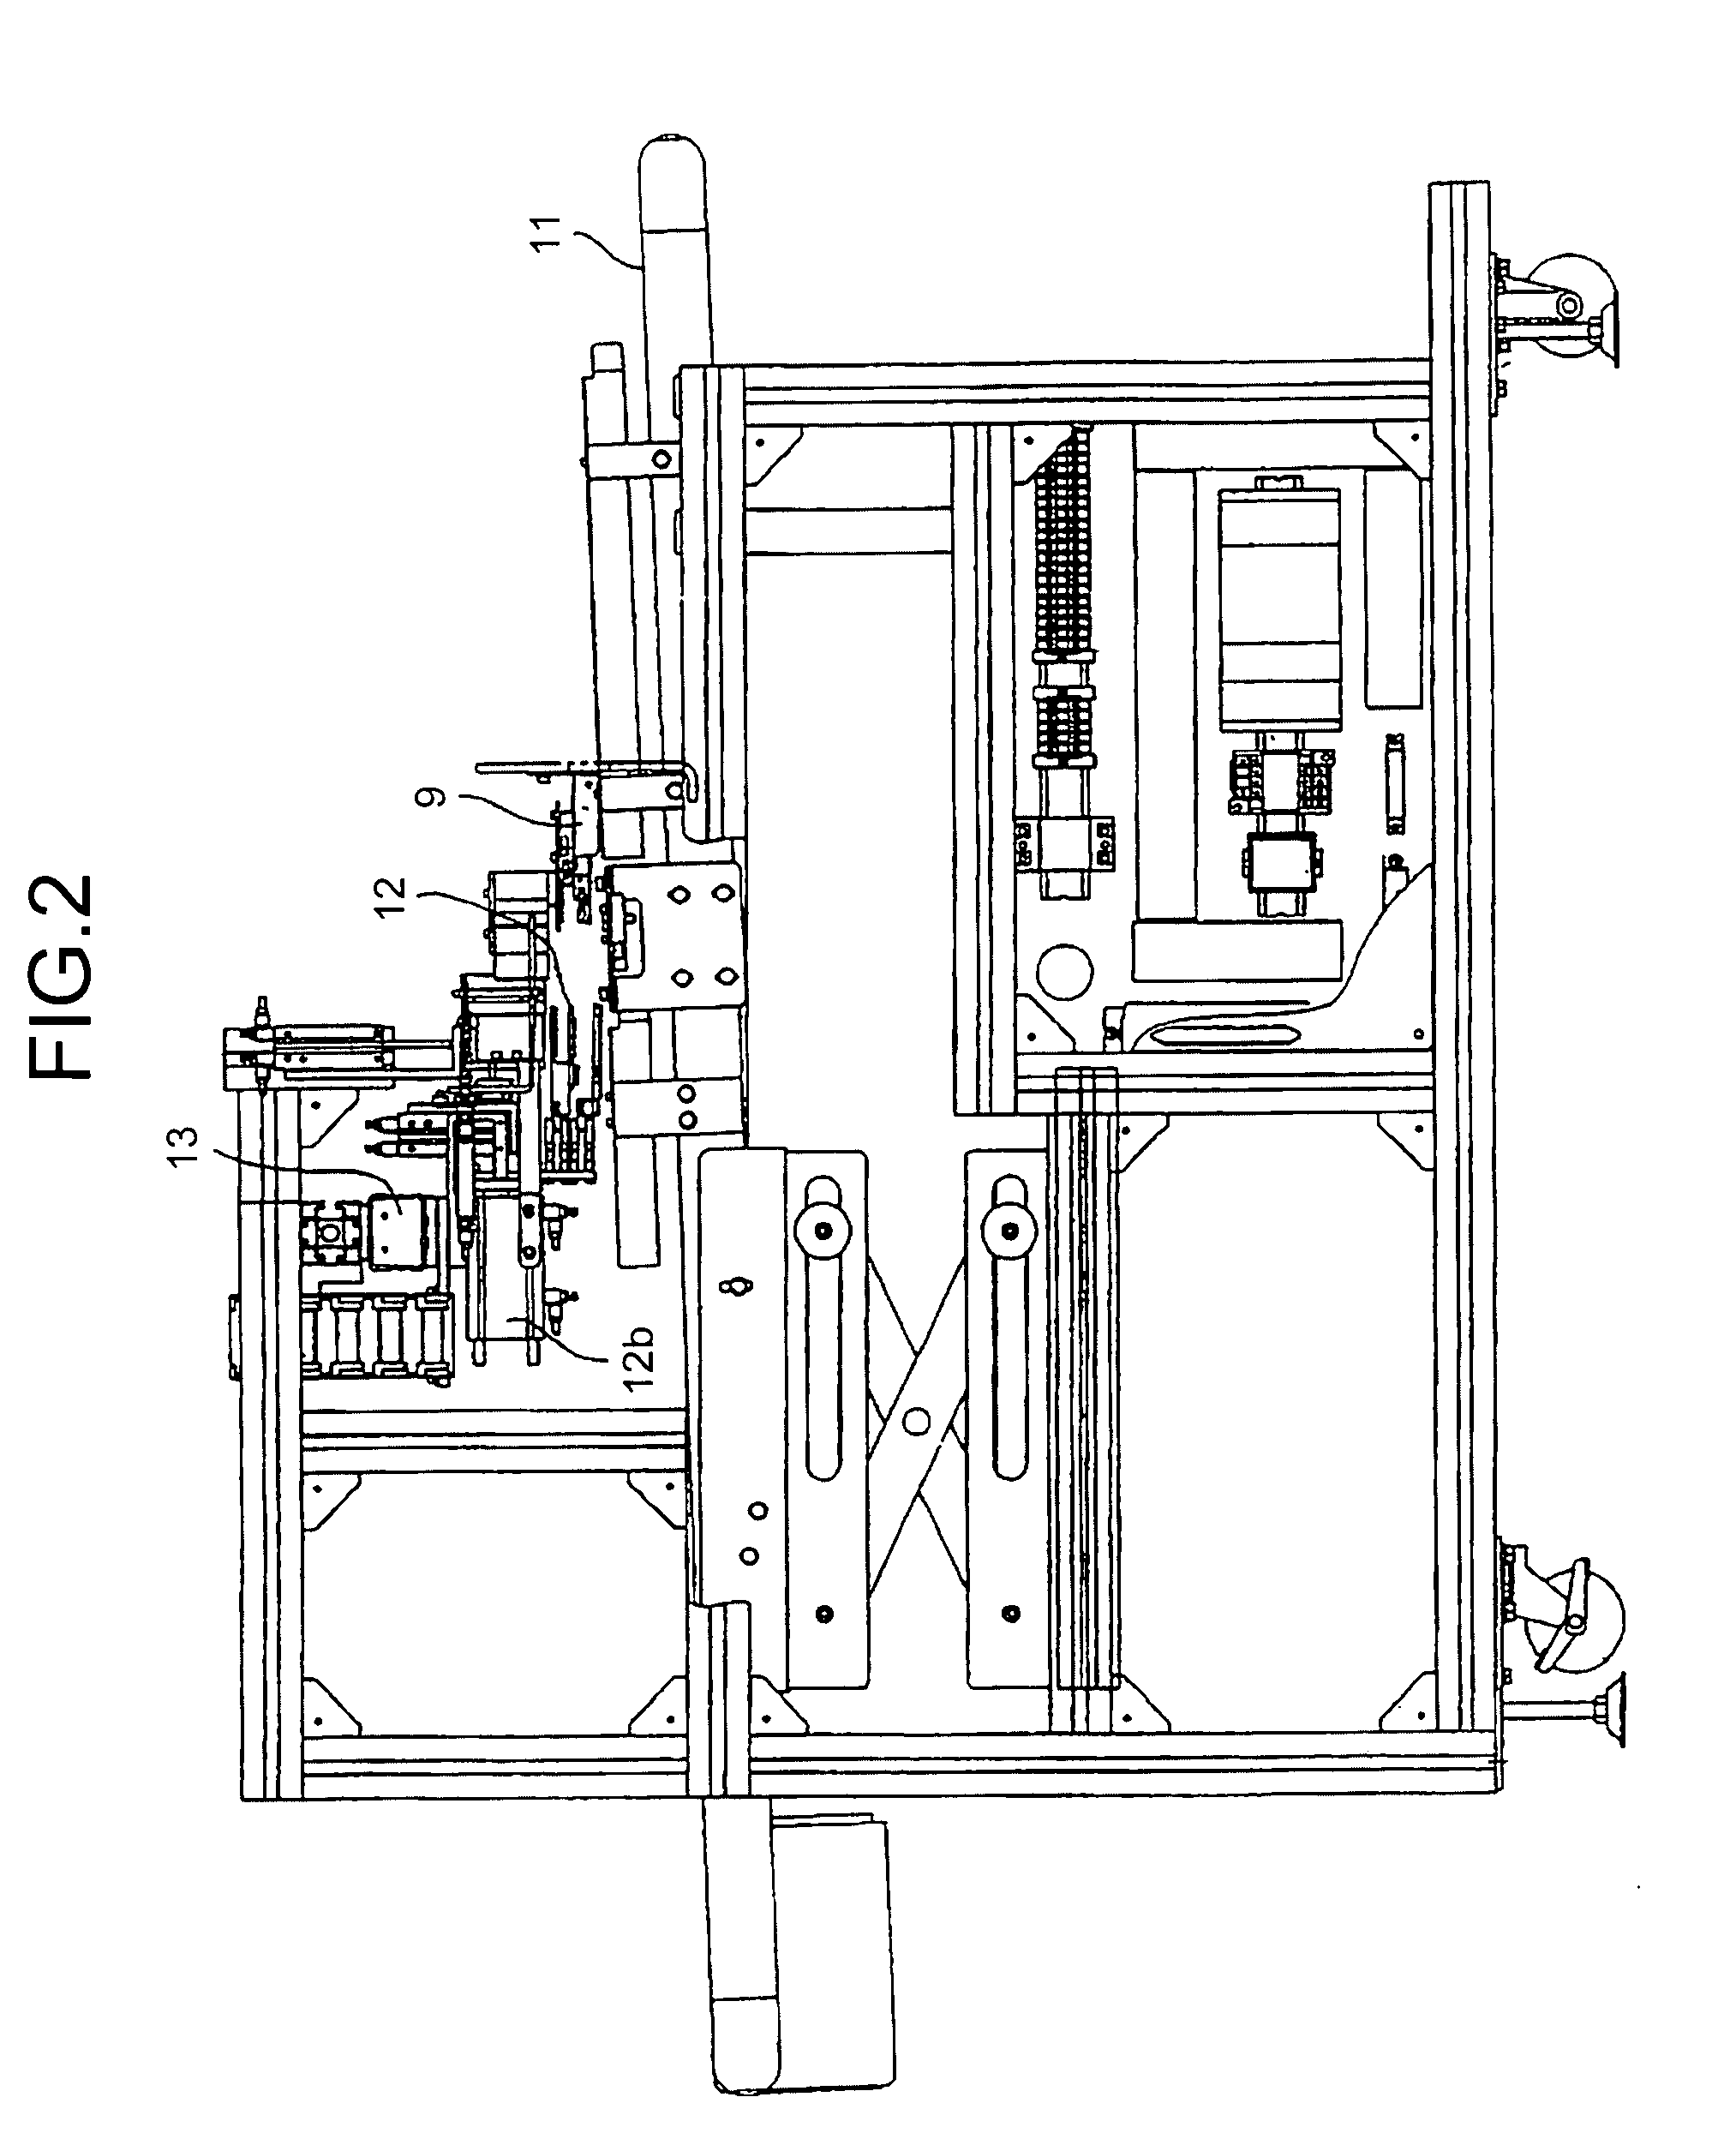 Grafted seedling producing device